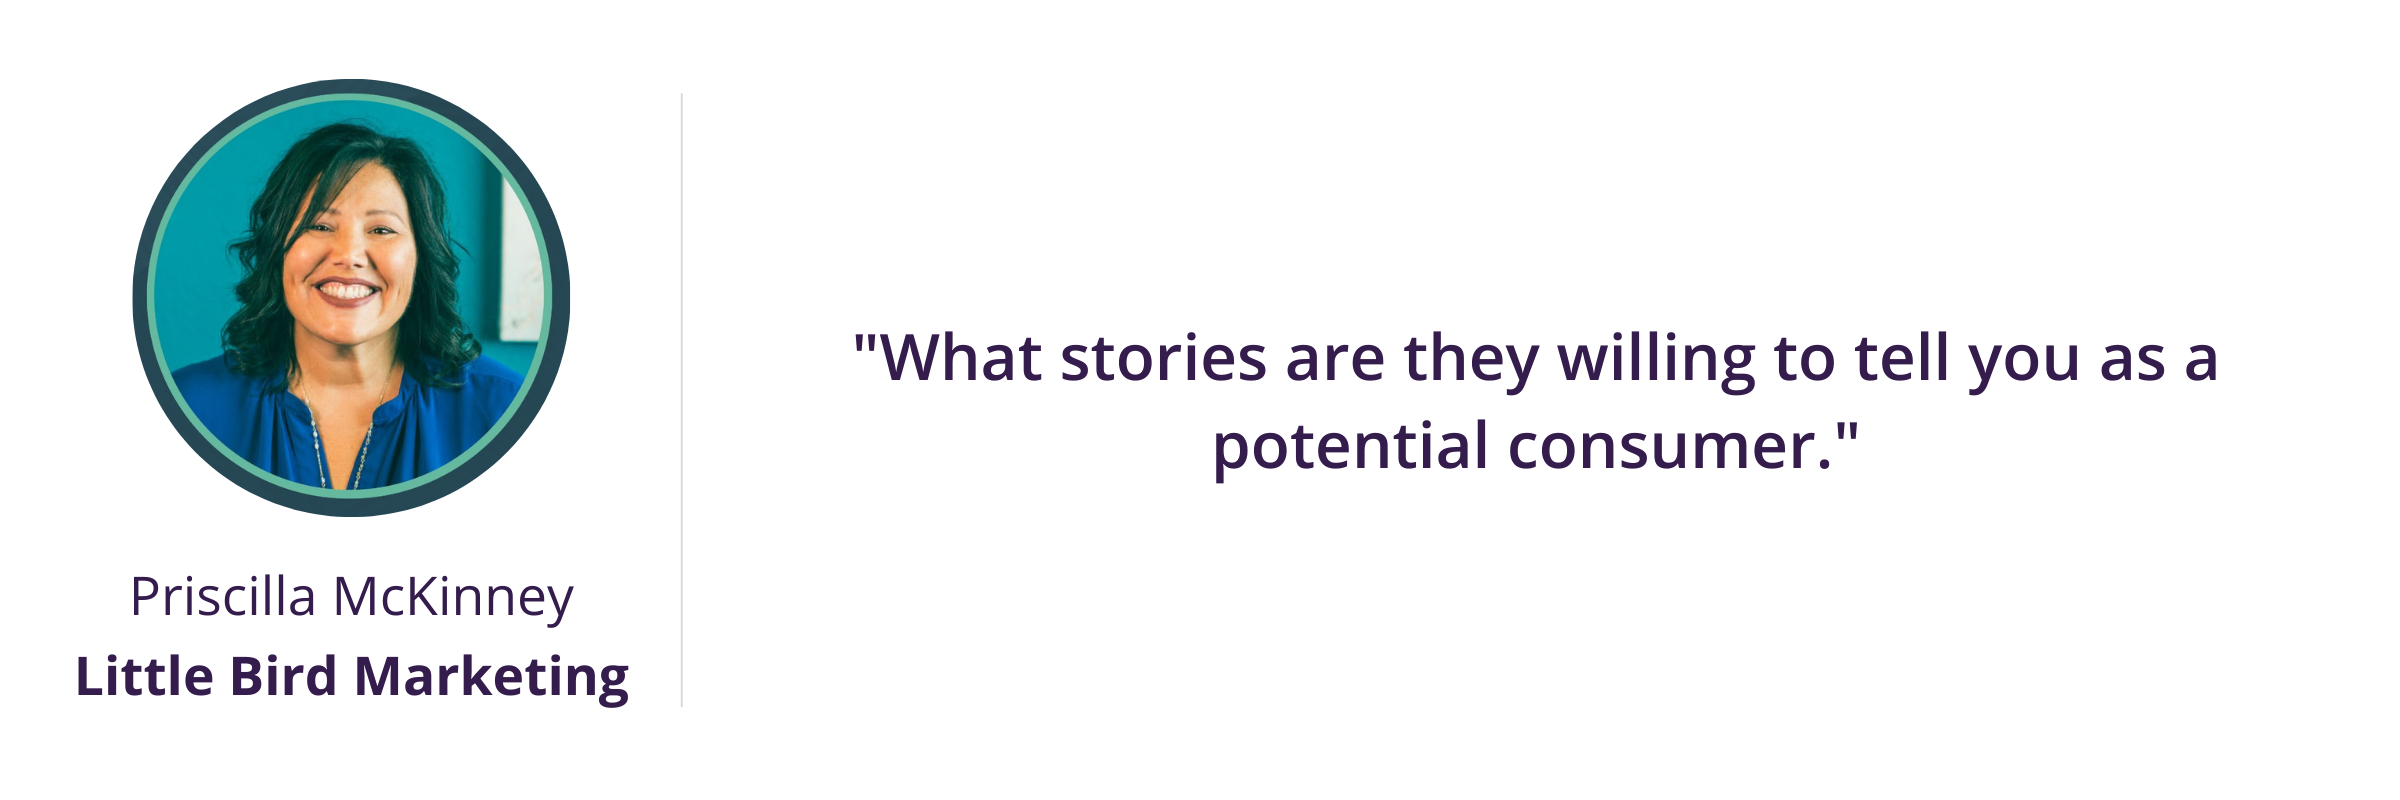 What stories are they willing to tell you as a potential consumer.